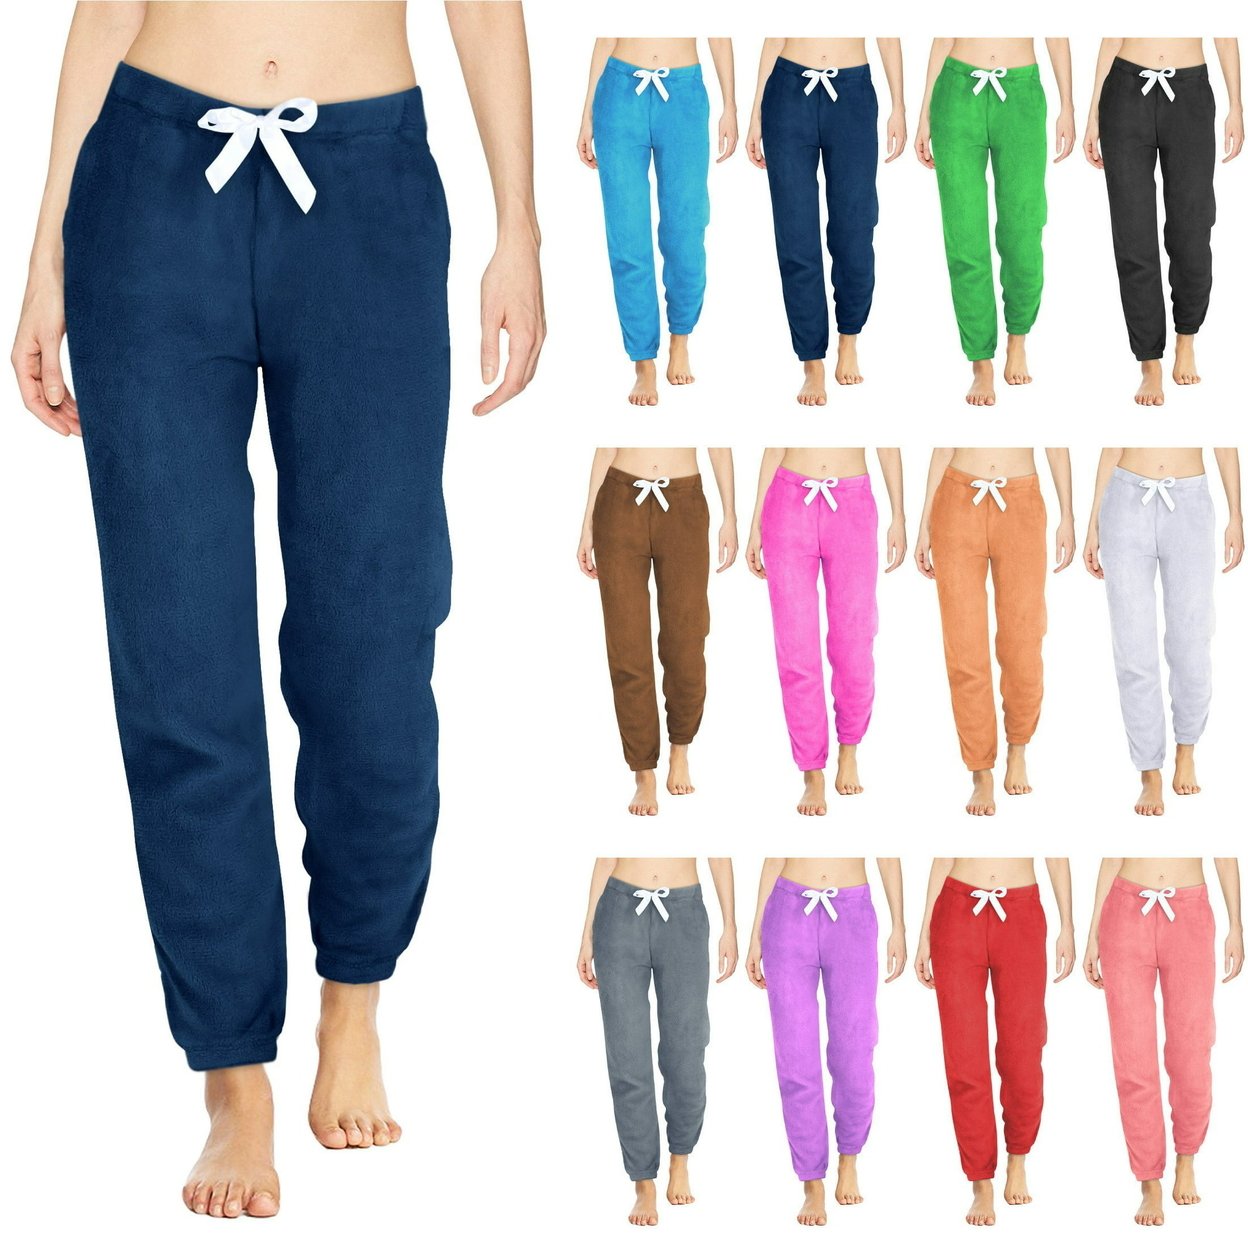 Multi-Pack: Women's Solid & Printed Ultra-Soft Comfy Stretch Micro-Fleece Pajama Lounge Pants - 1-pack, Medium, Shapes